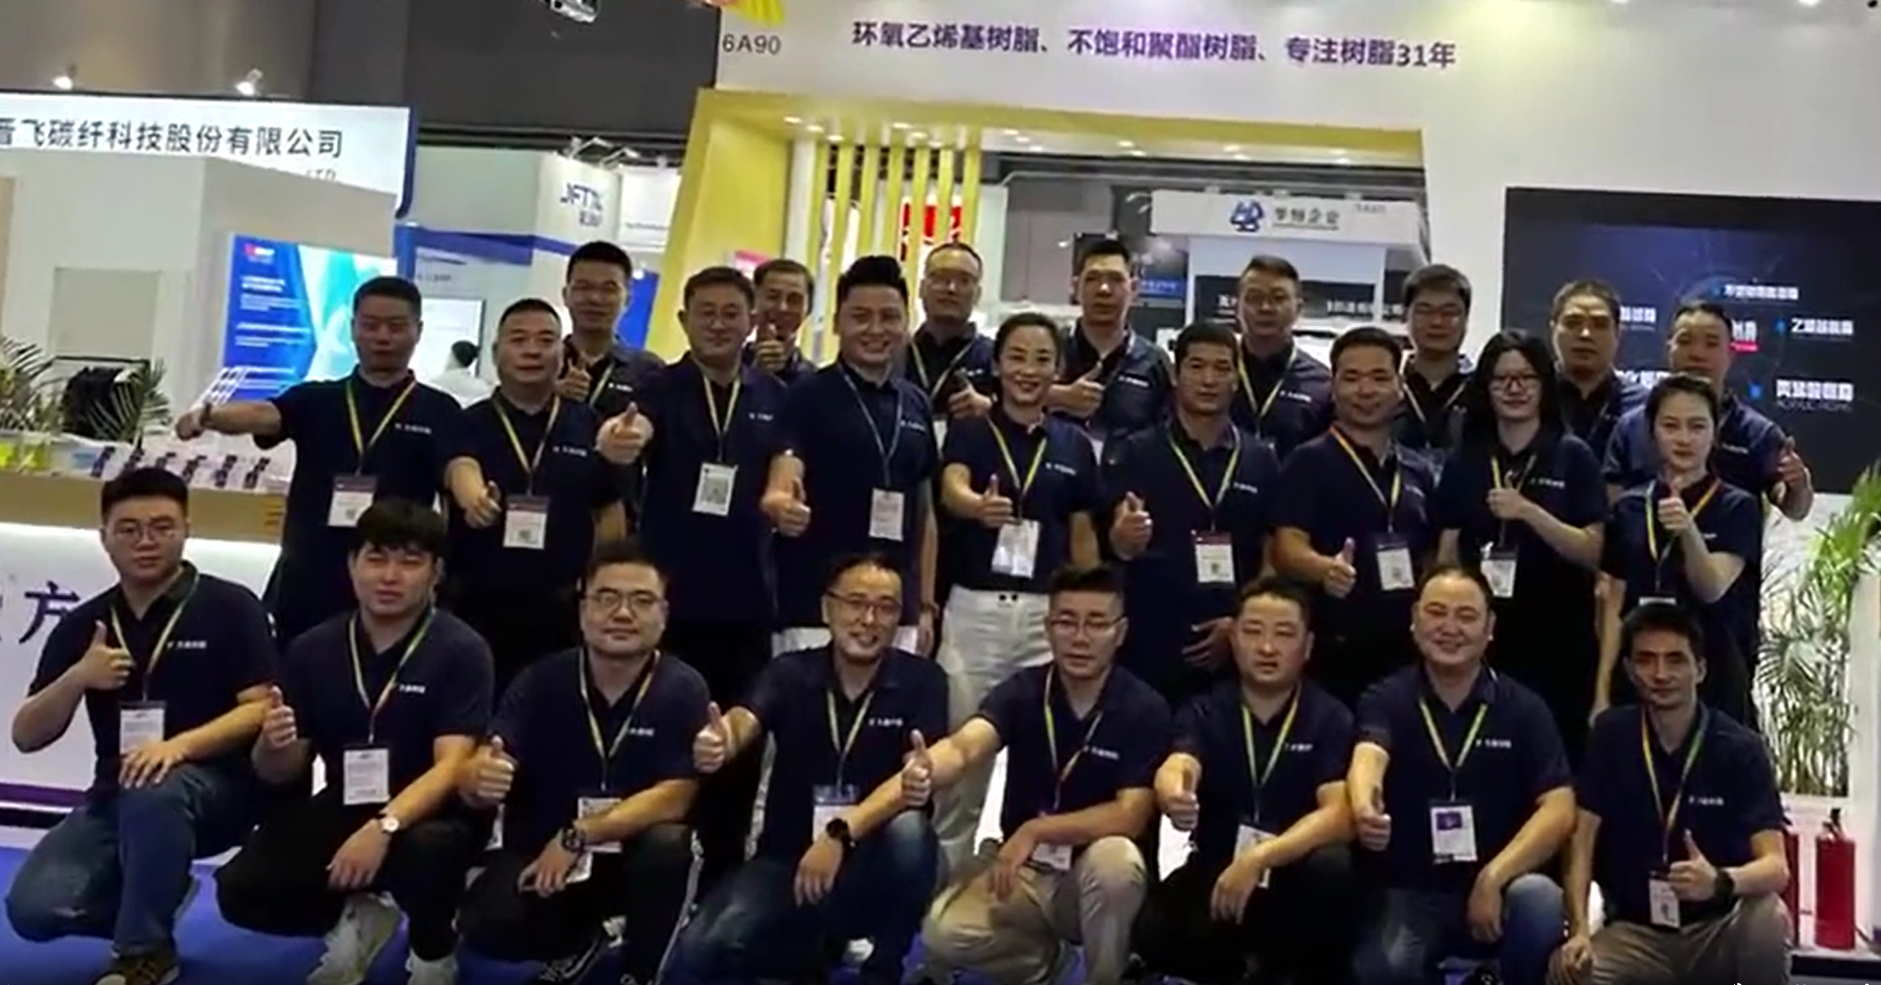 Fangxin resin made a wonderful appearance at the China International Composite Materials Exhibition